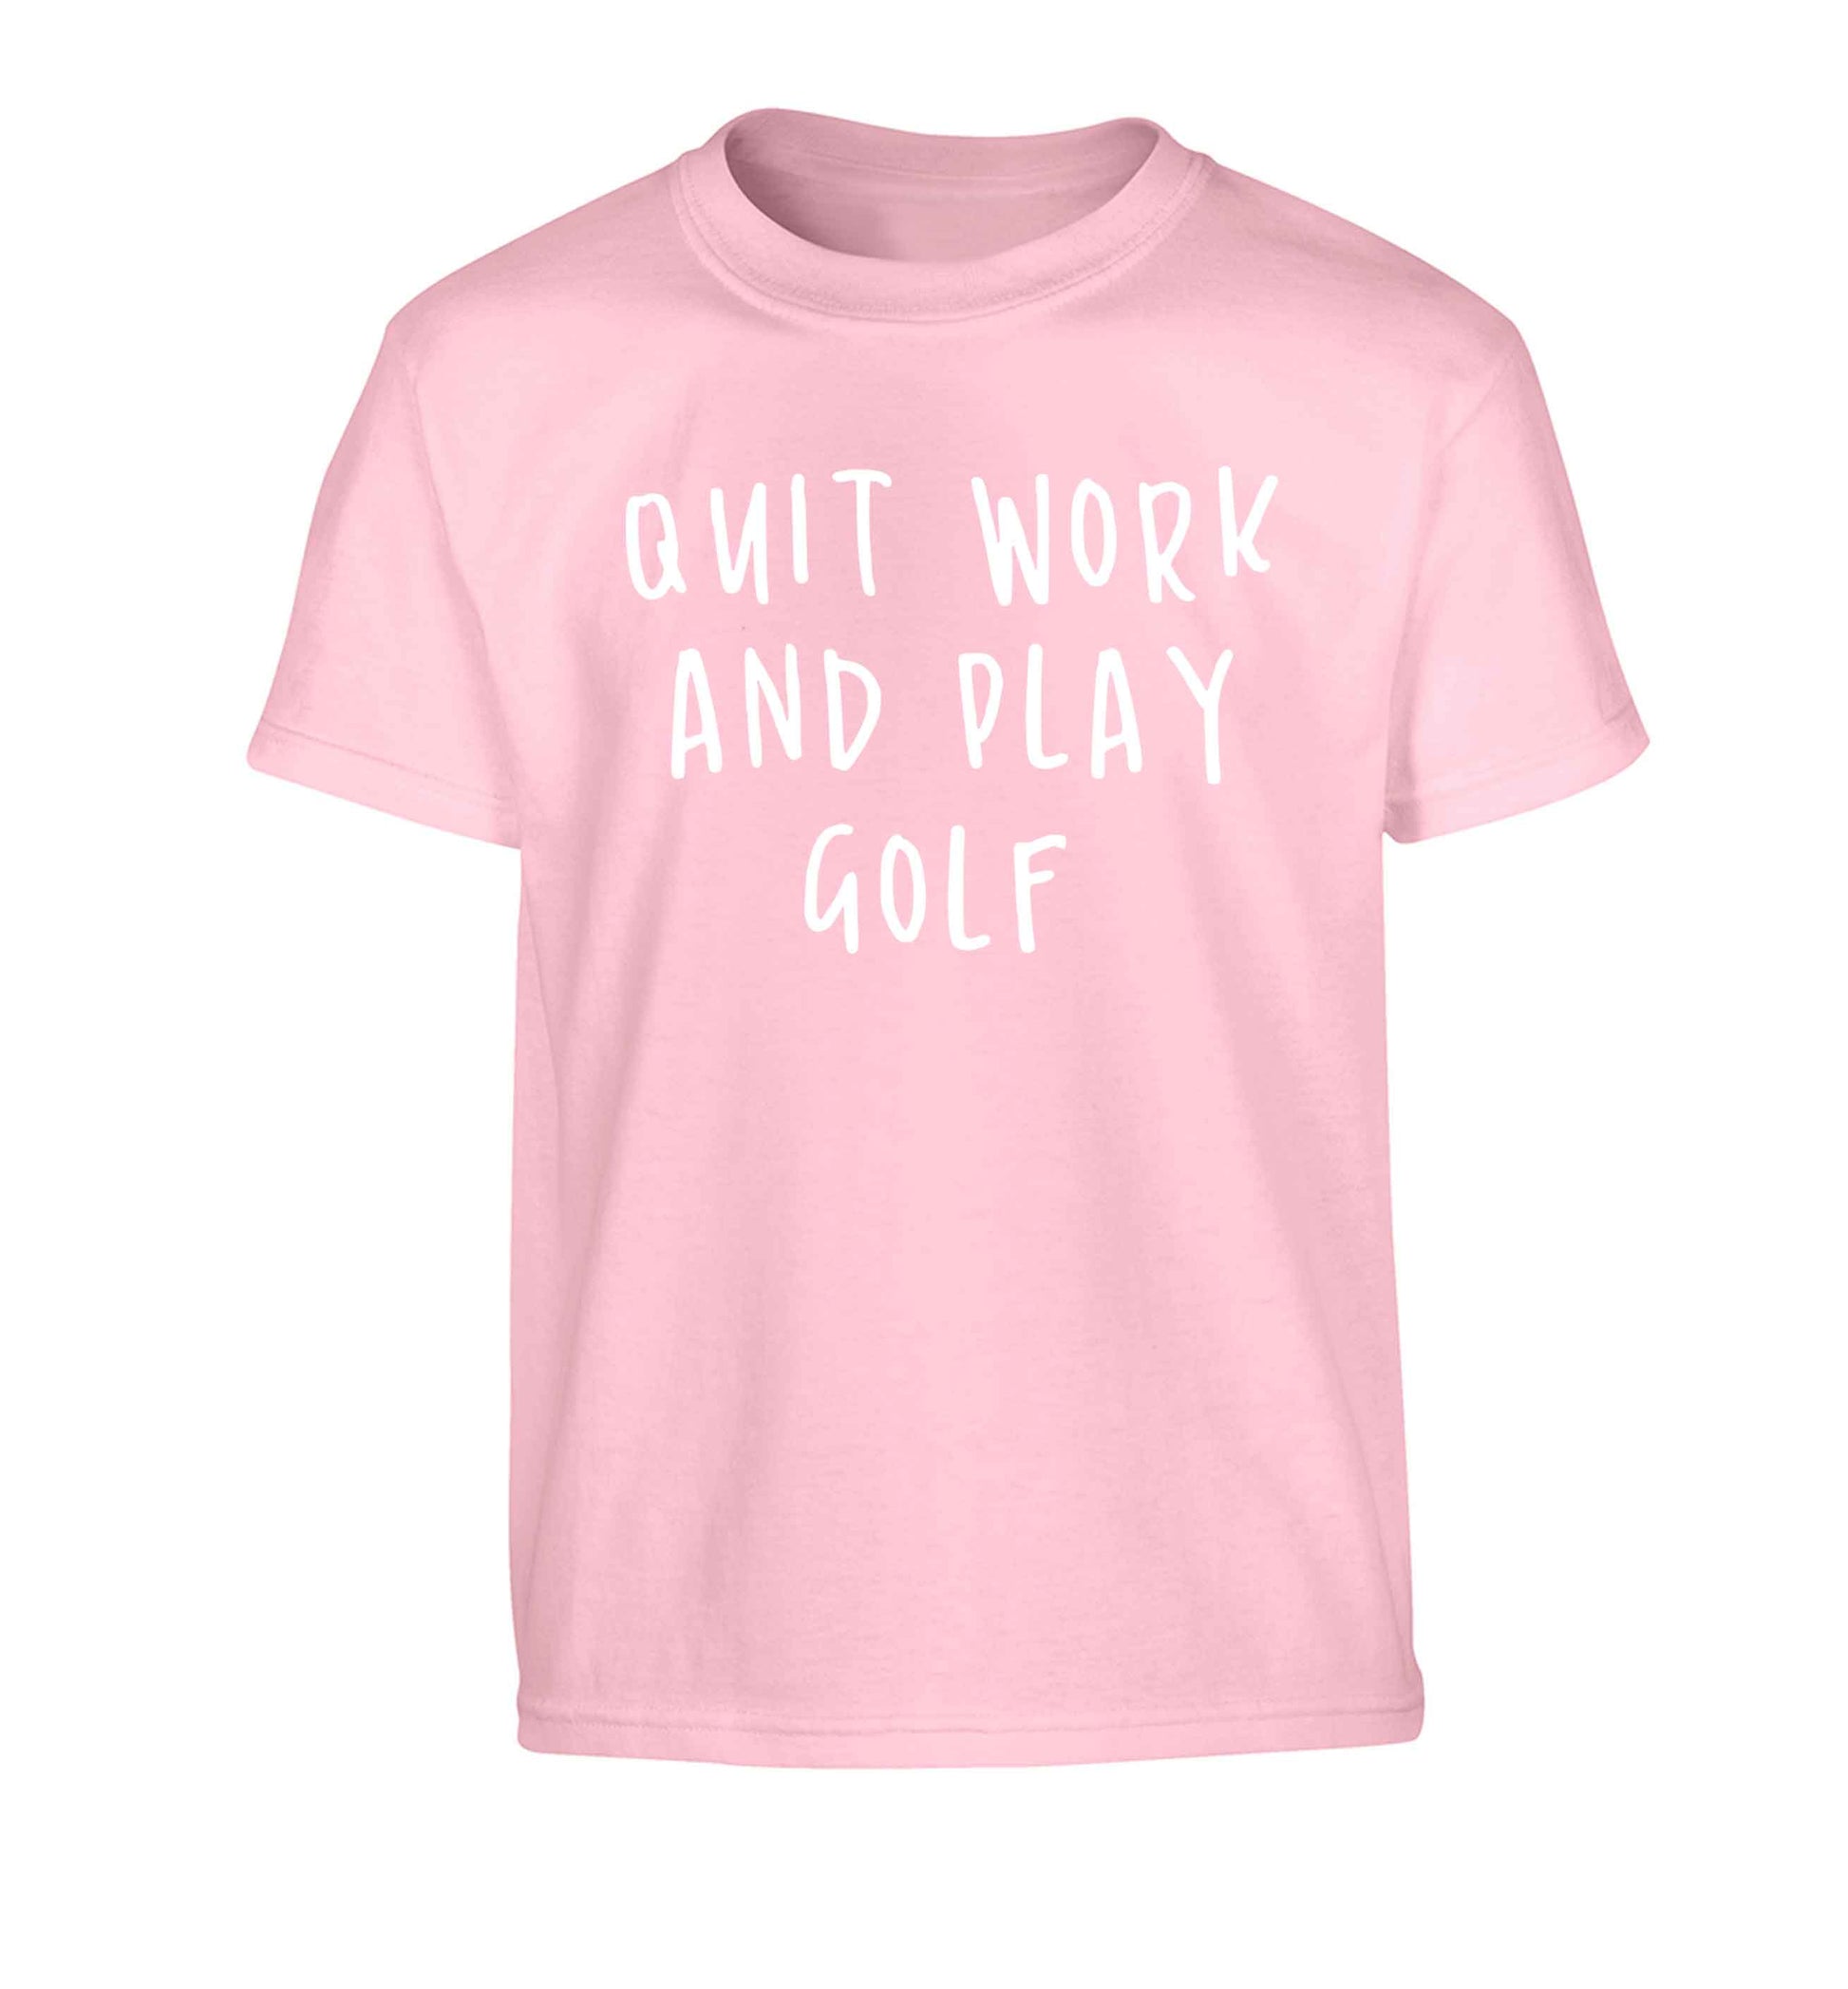 Quit work and play golf Children's light pink Tshirt 12-13 Years